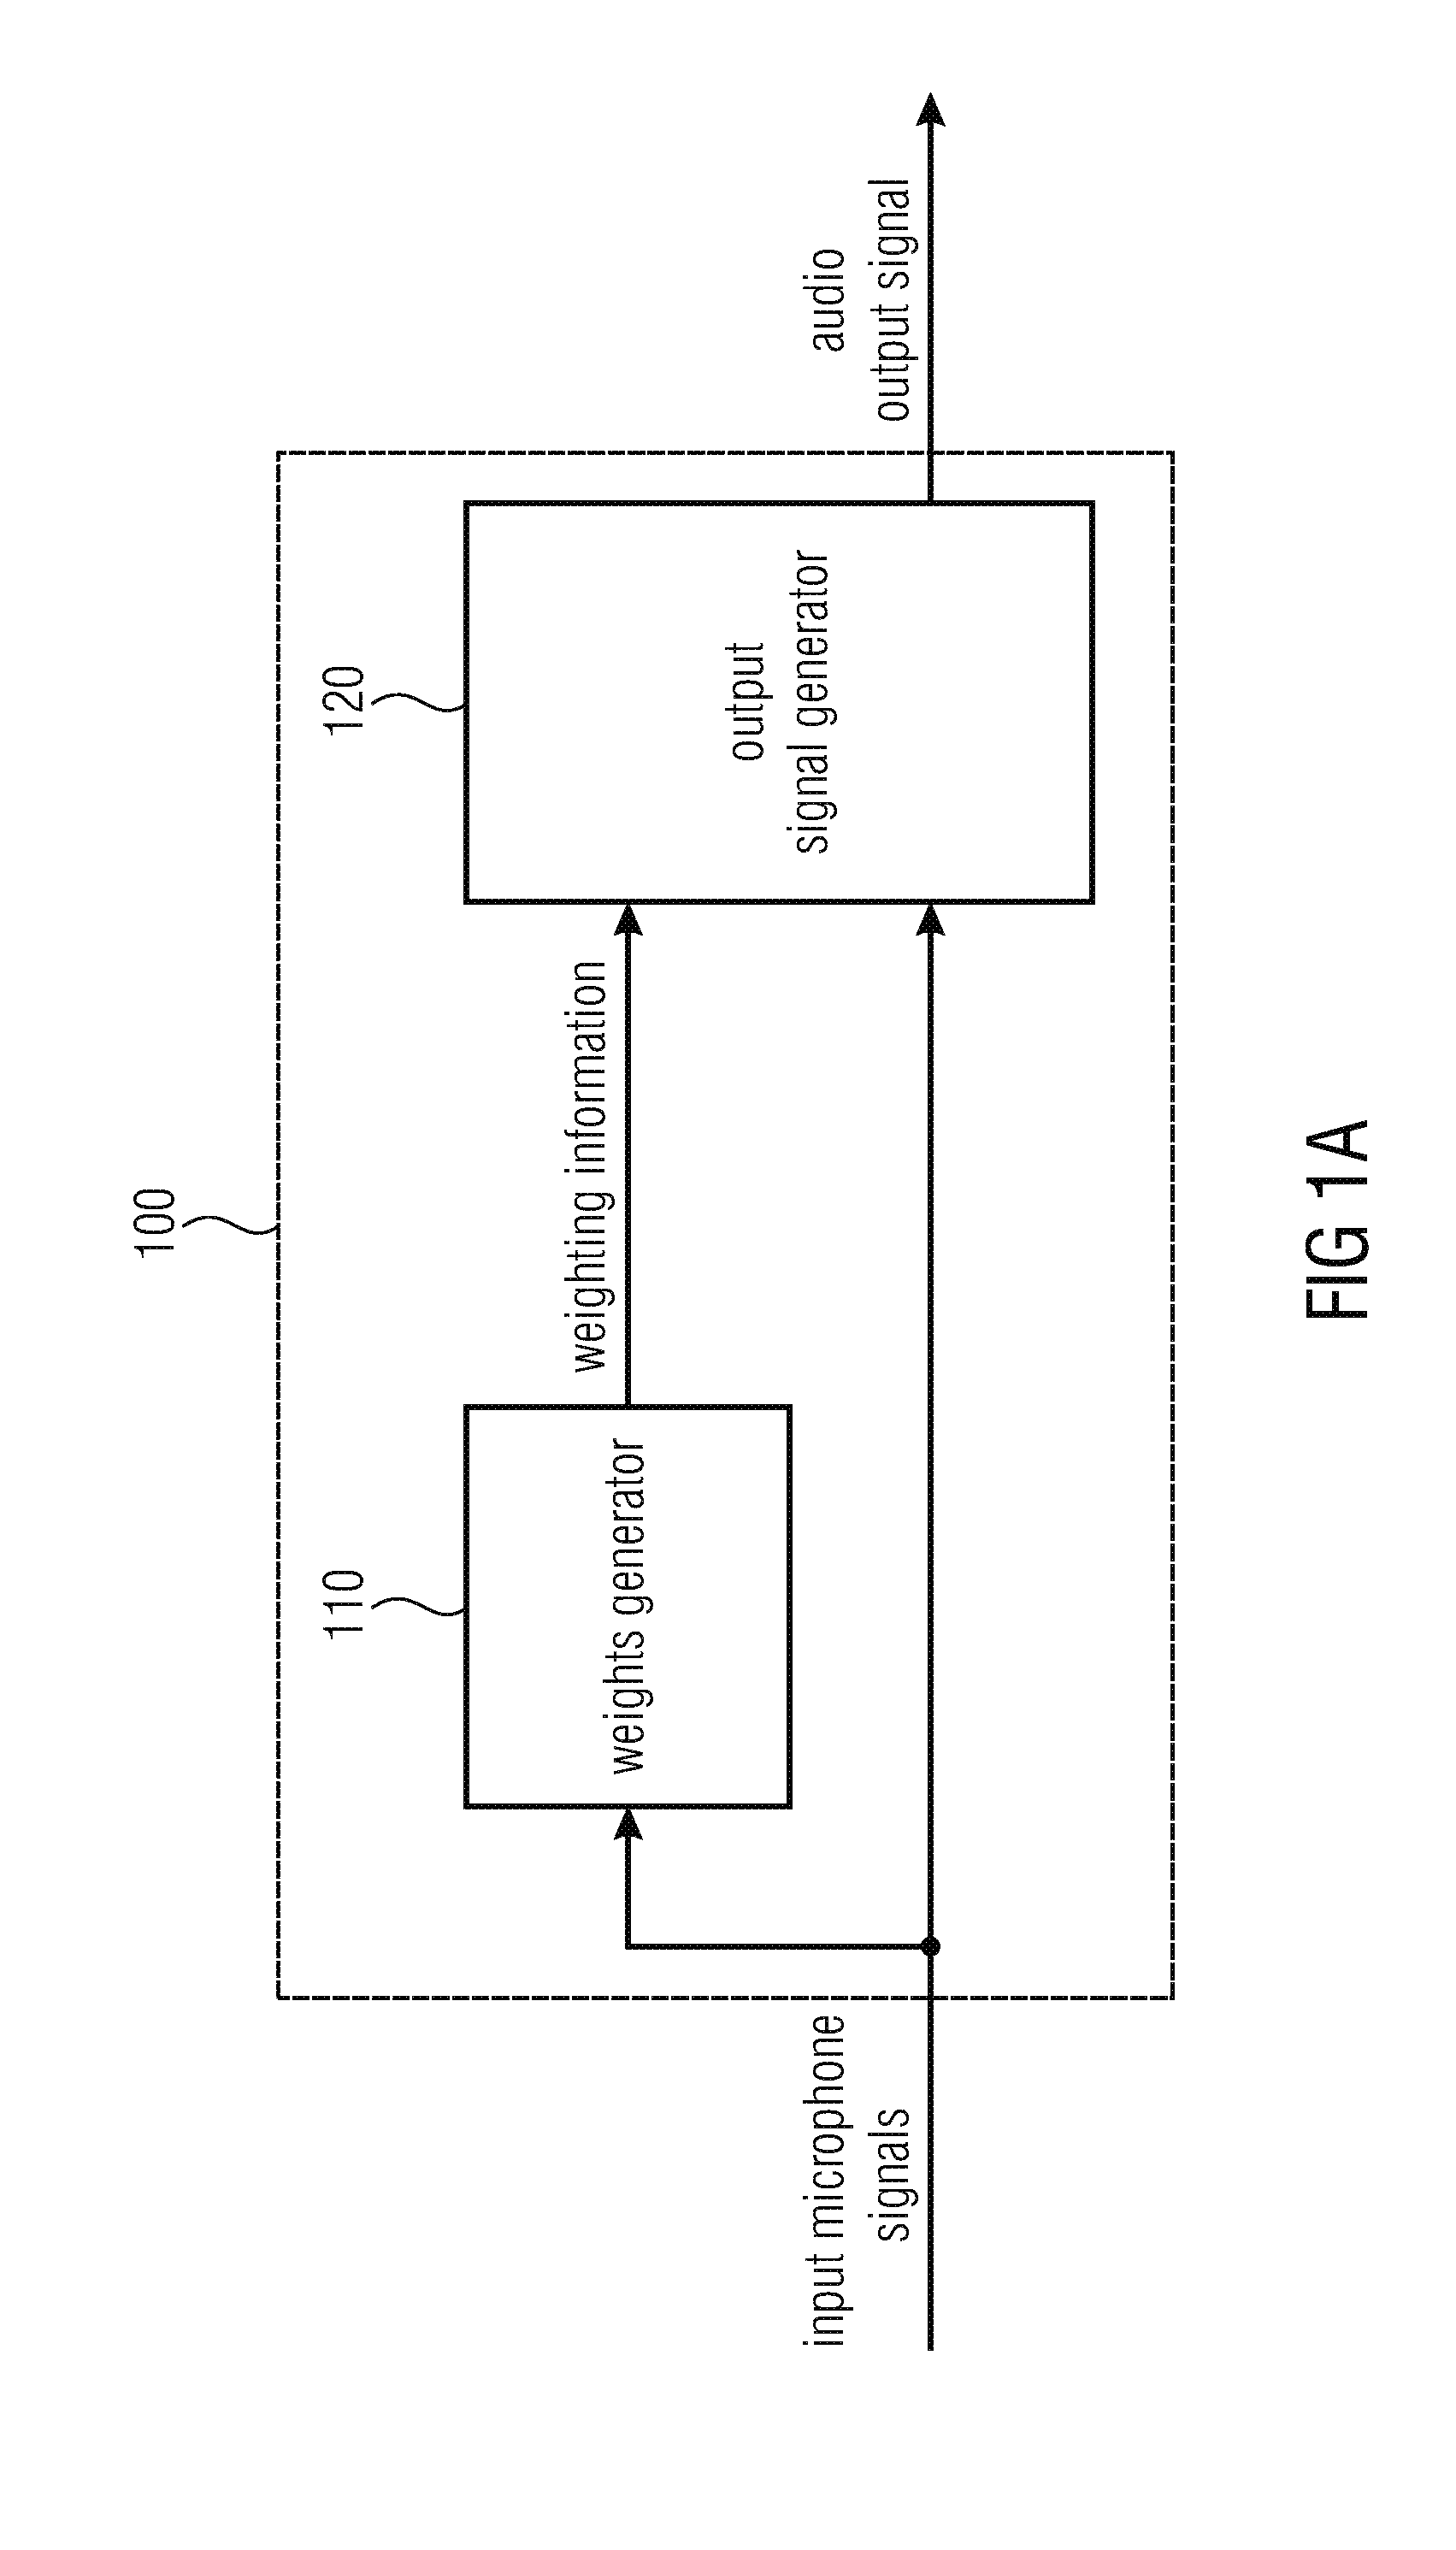 Filter and method for informed spatial filtering using multiple instantaneous direction-of-arrival estimates